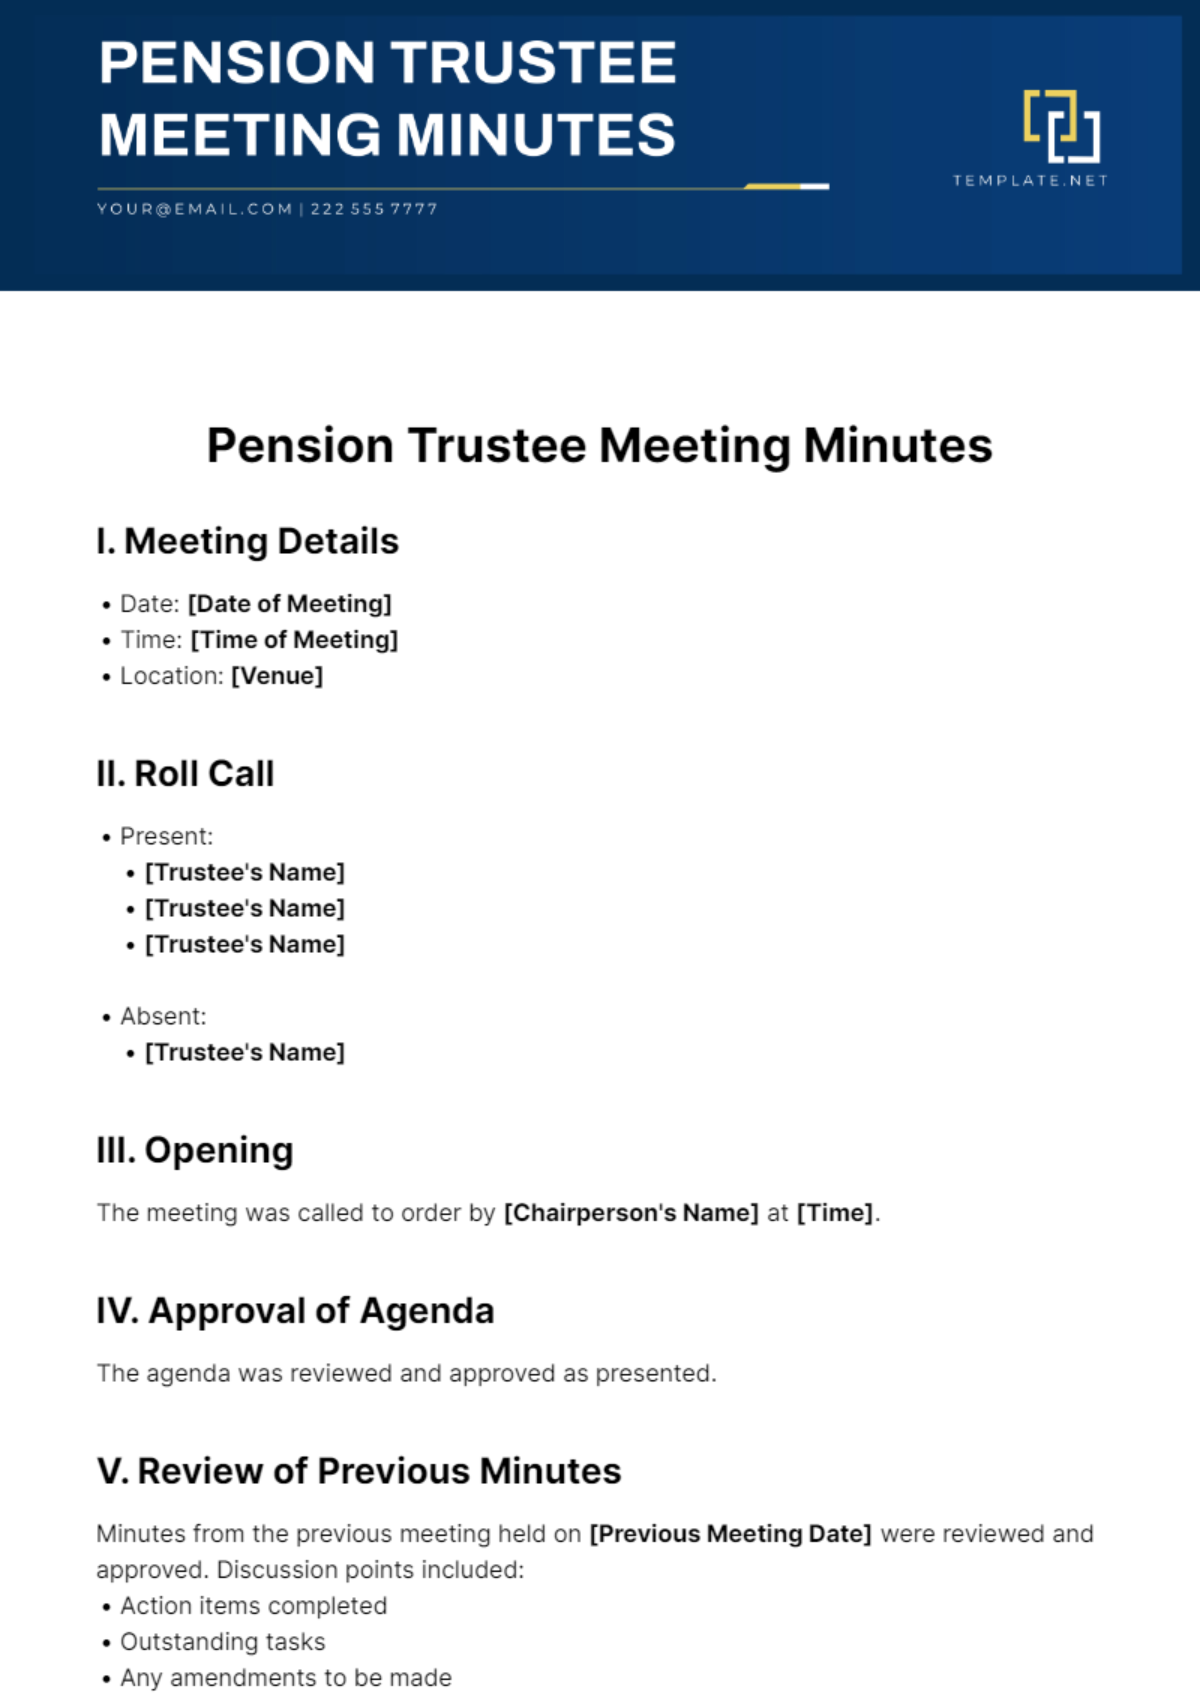 Pension Trustee Meeting Minutes Template